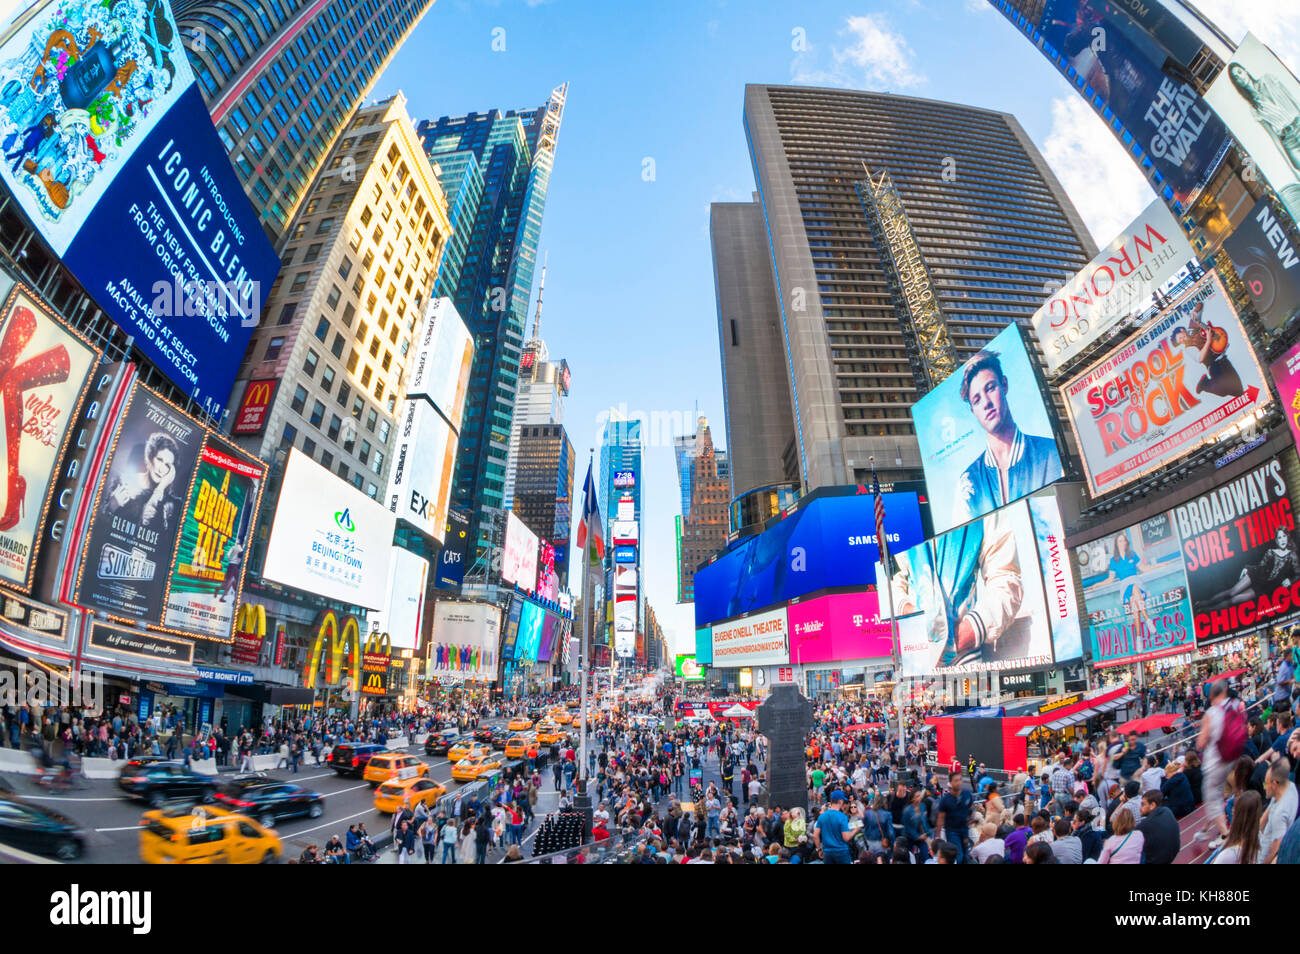 Times square New york usa new york Times square busy crowded with tourists manhattan New york USA America United states of america Stock Photo